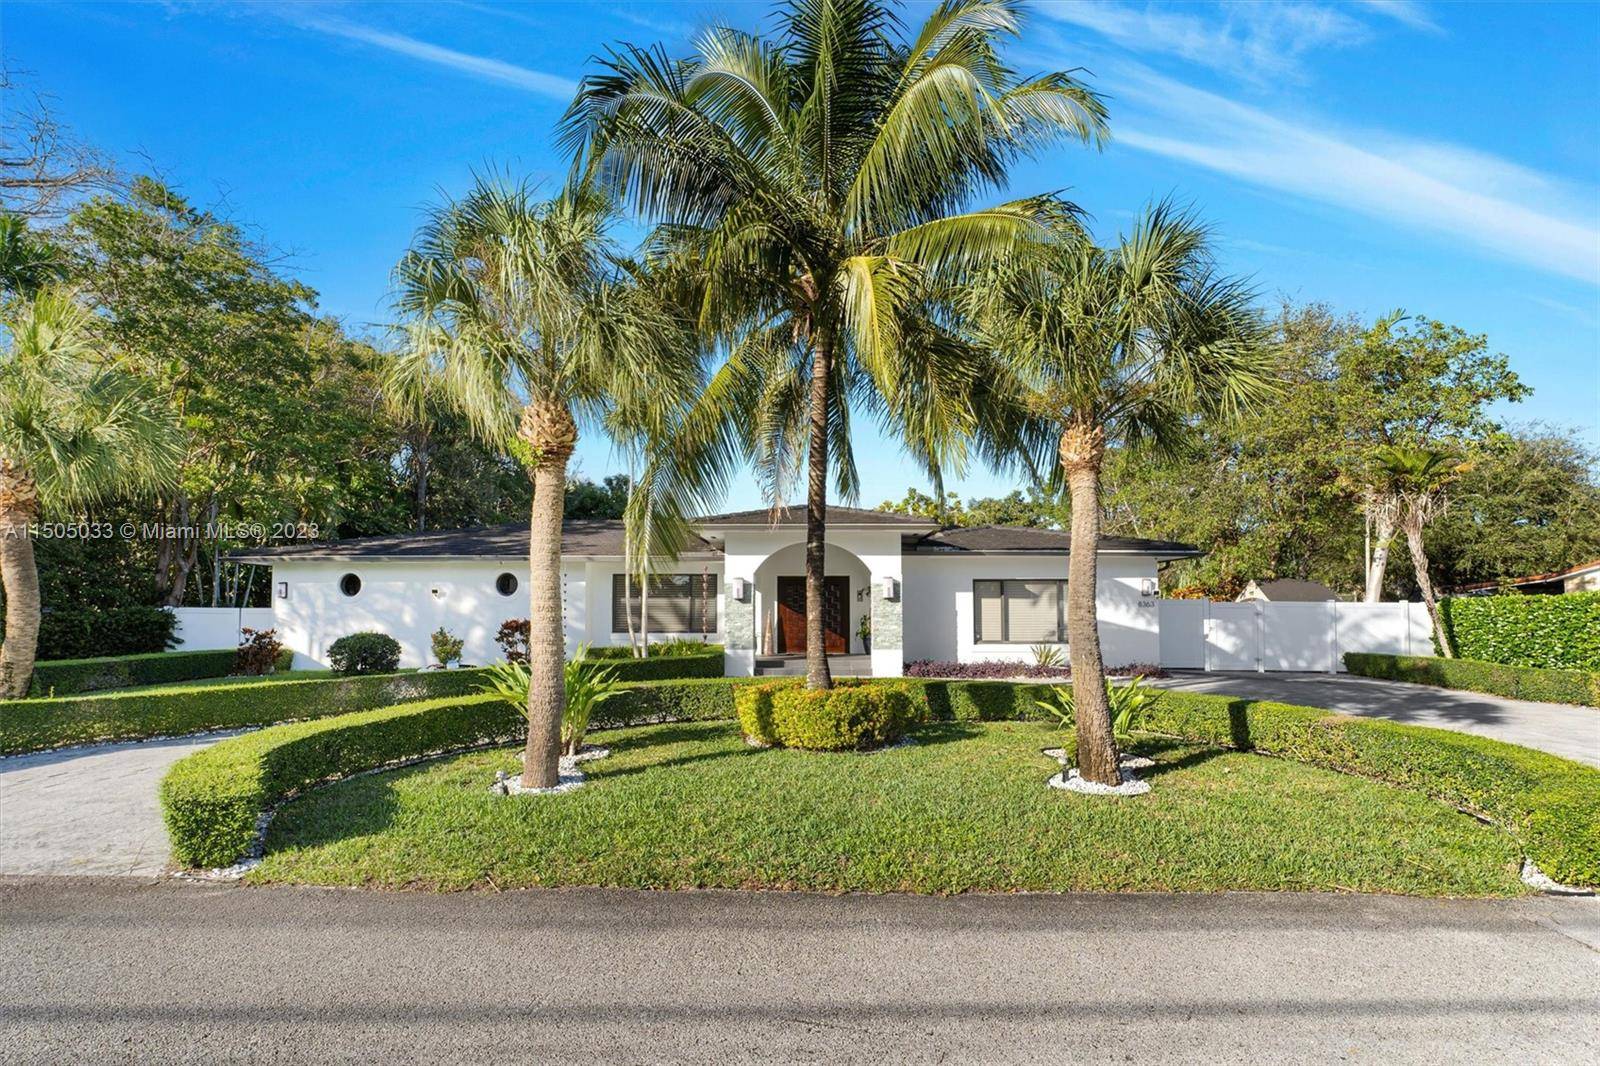 8363 SW 98th St, Miami, FL 33156, Offers a spacious home with five bedrooms and six bathrooms that offers ample living space for a prominent family.